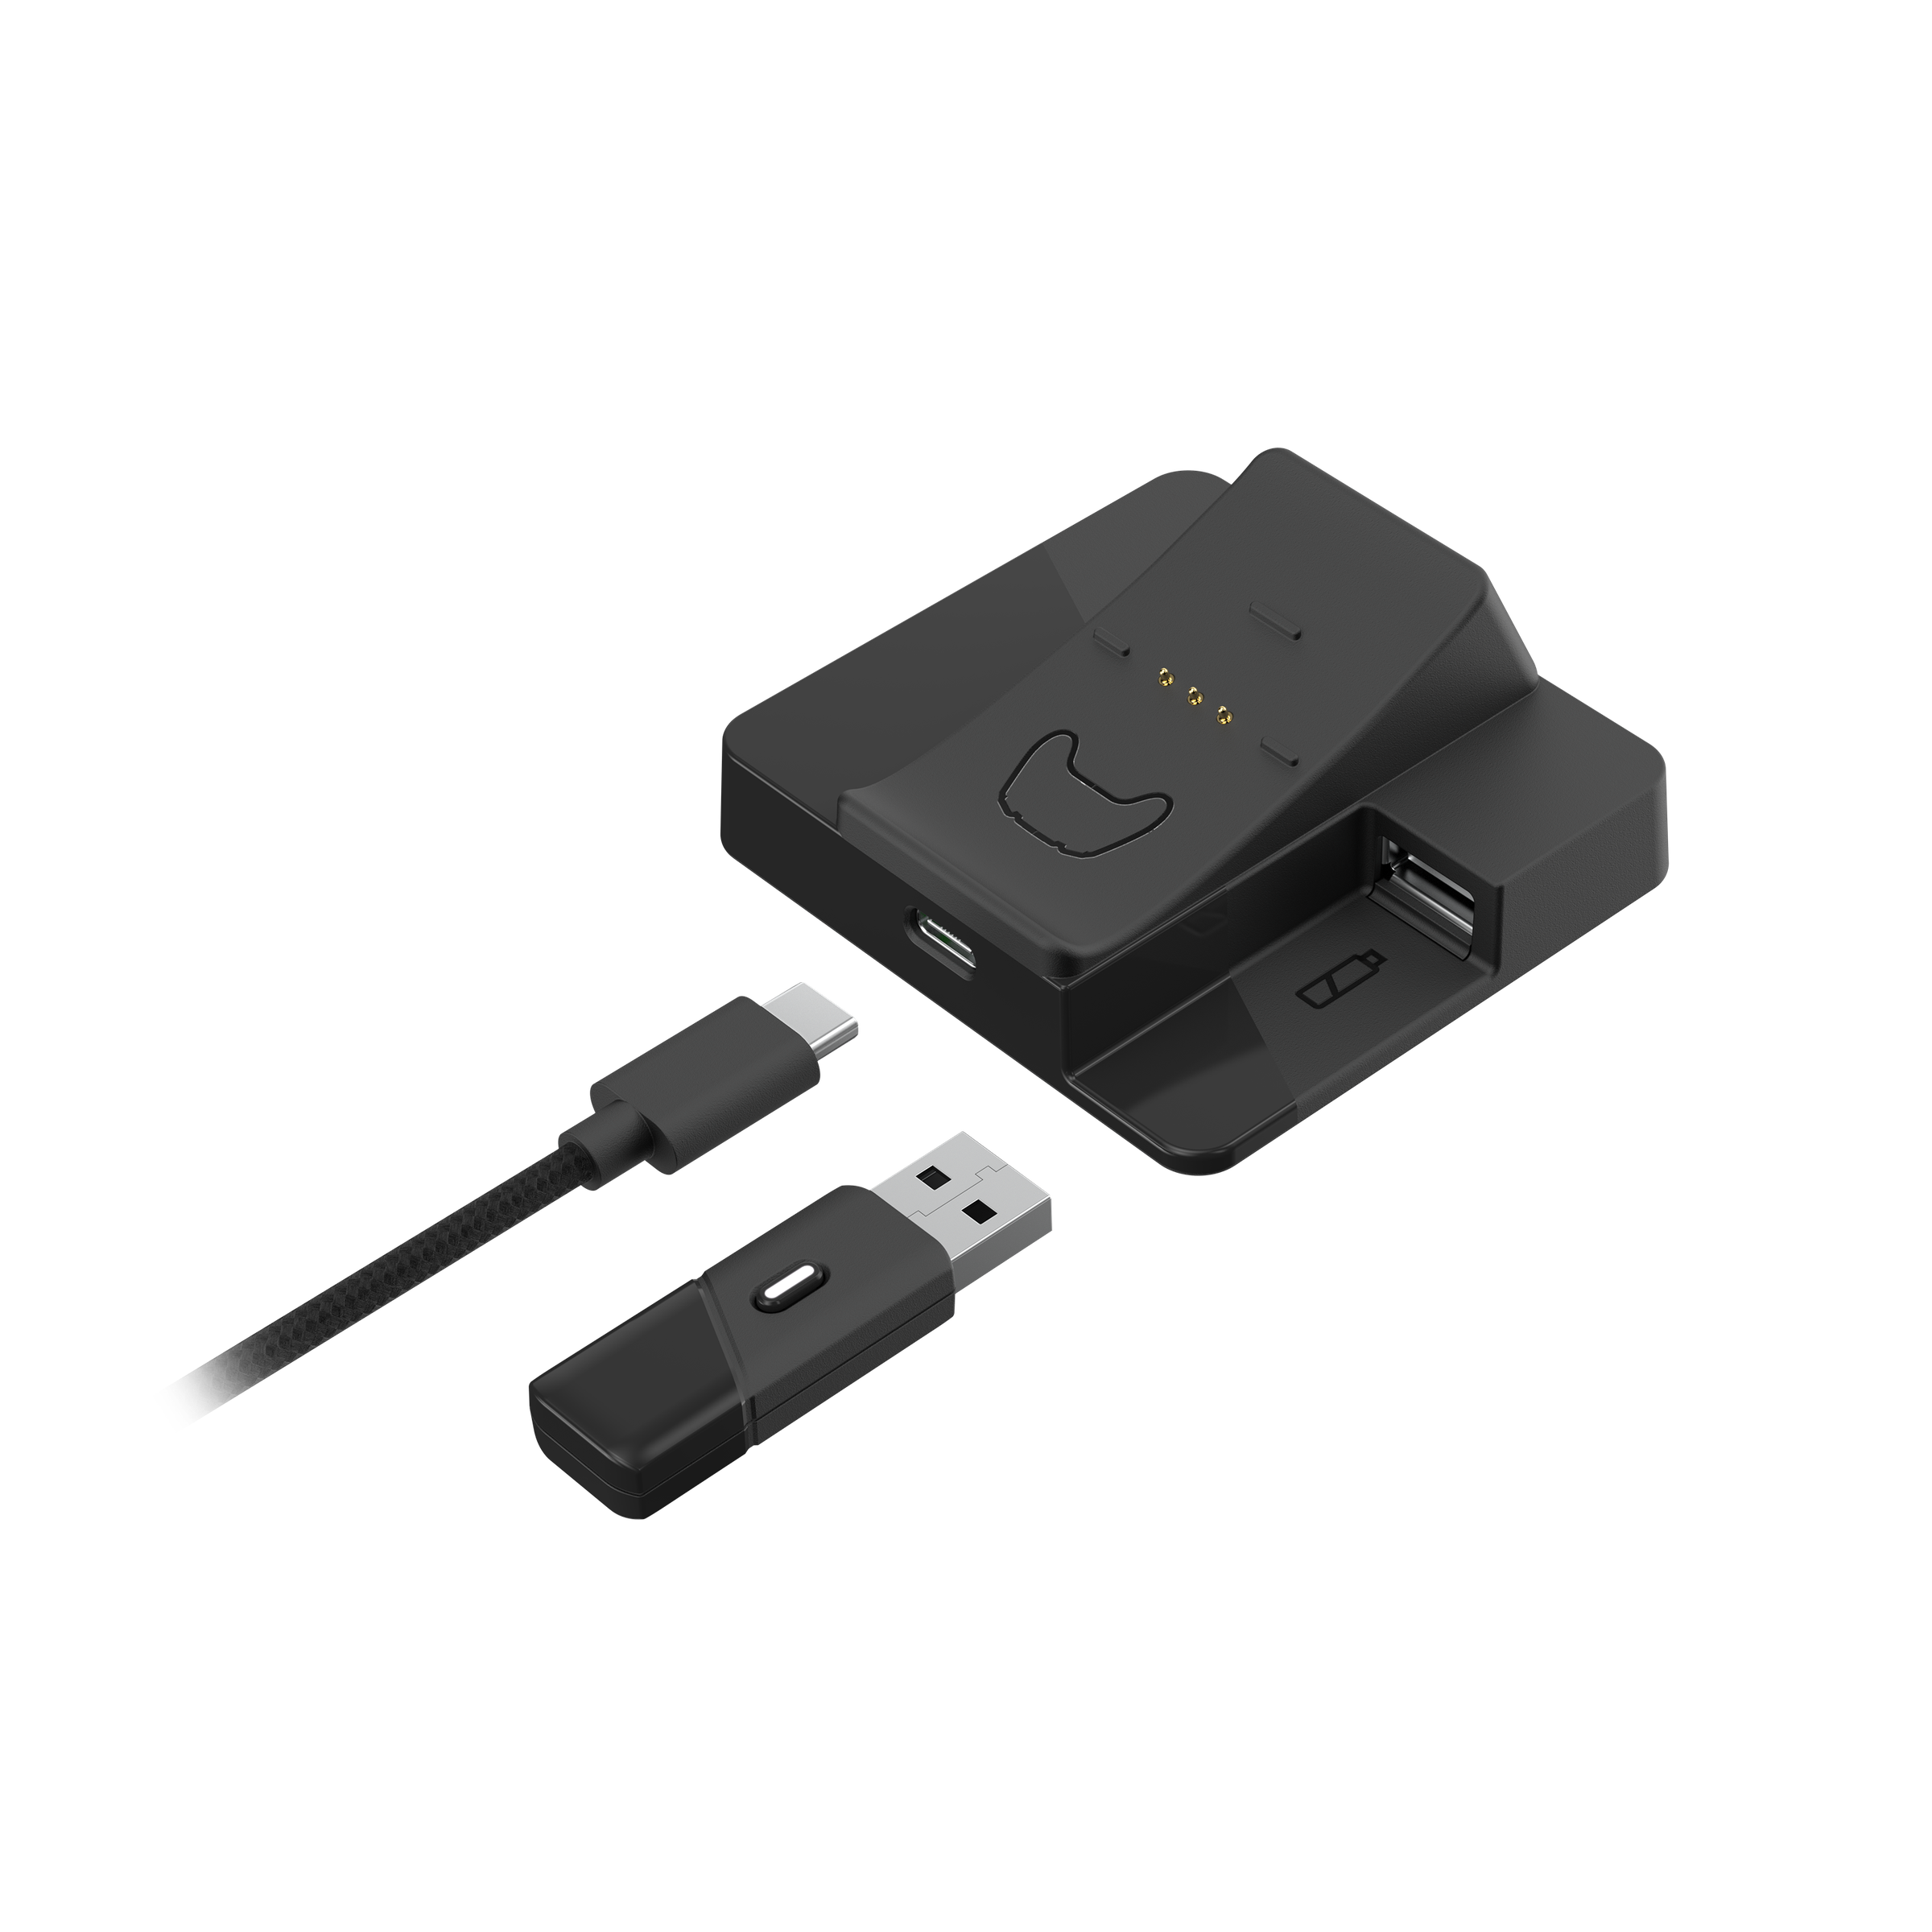 The USB-A dongle has to tie up a port on your console or PC, but at least it can daisy-chain with the charging dock.